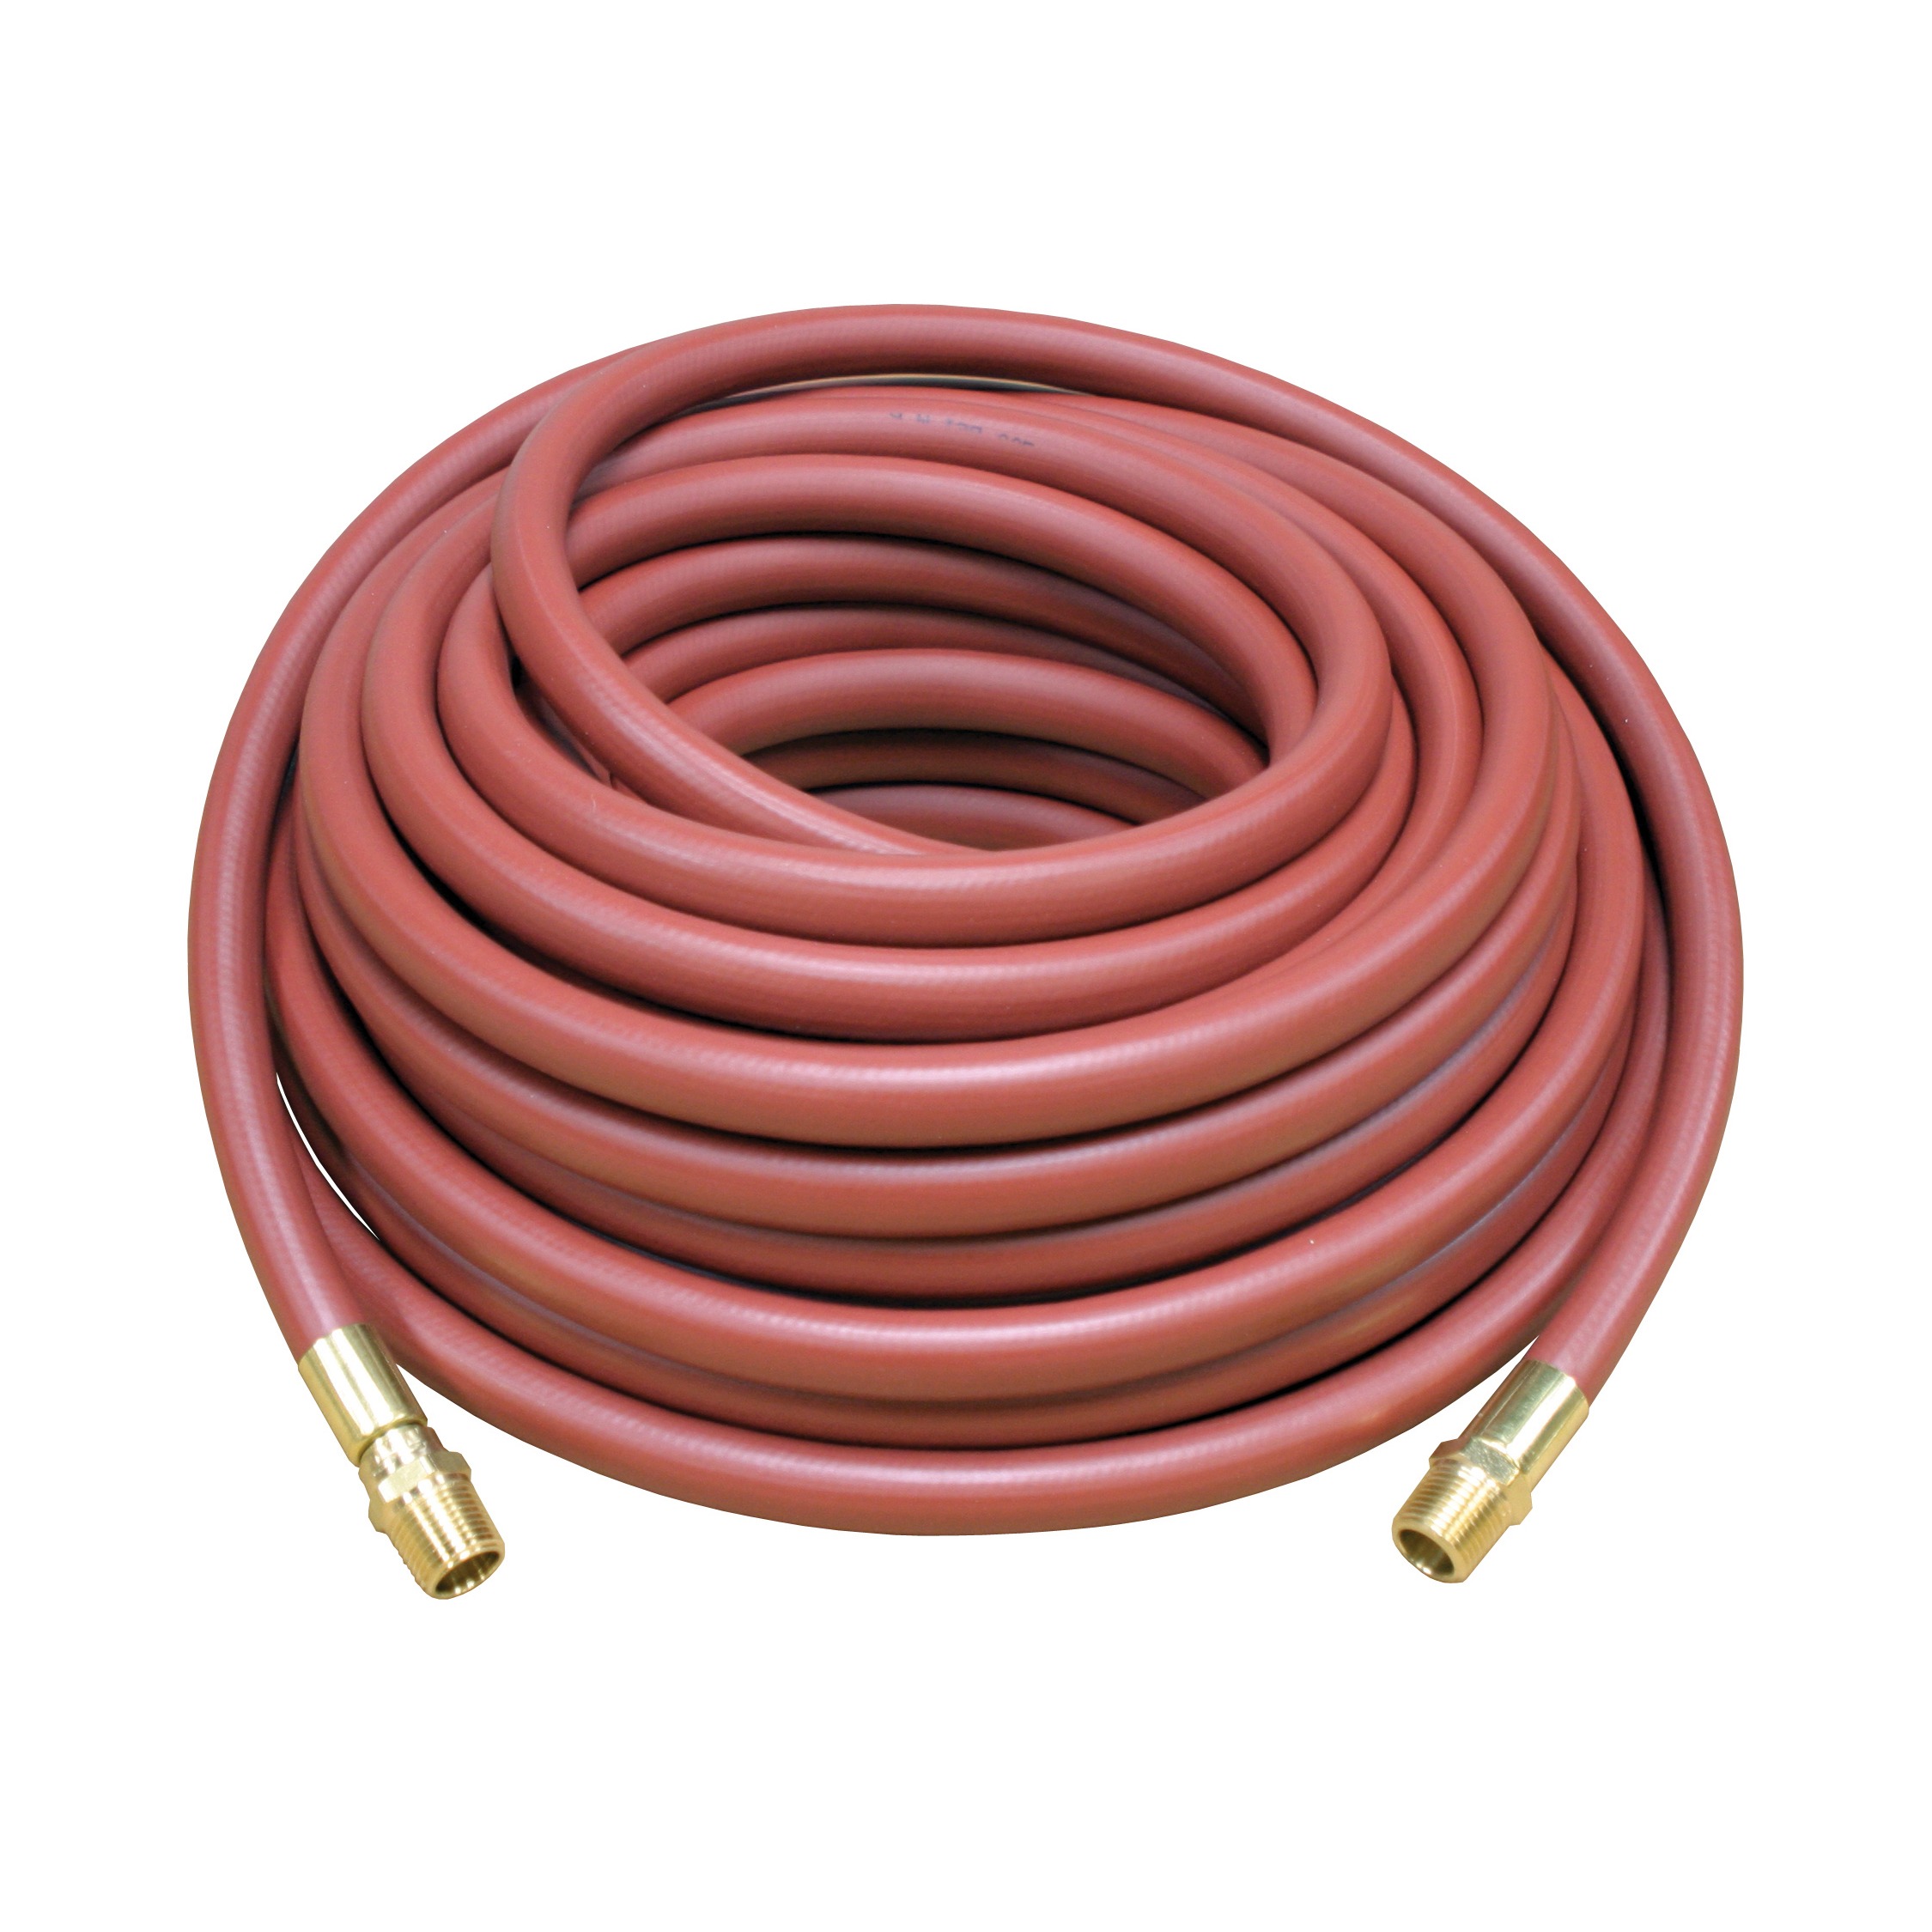 Reelcraft S601026-75 - 3/4 in. x 75 ft. Low Pressure Air/Water Hose